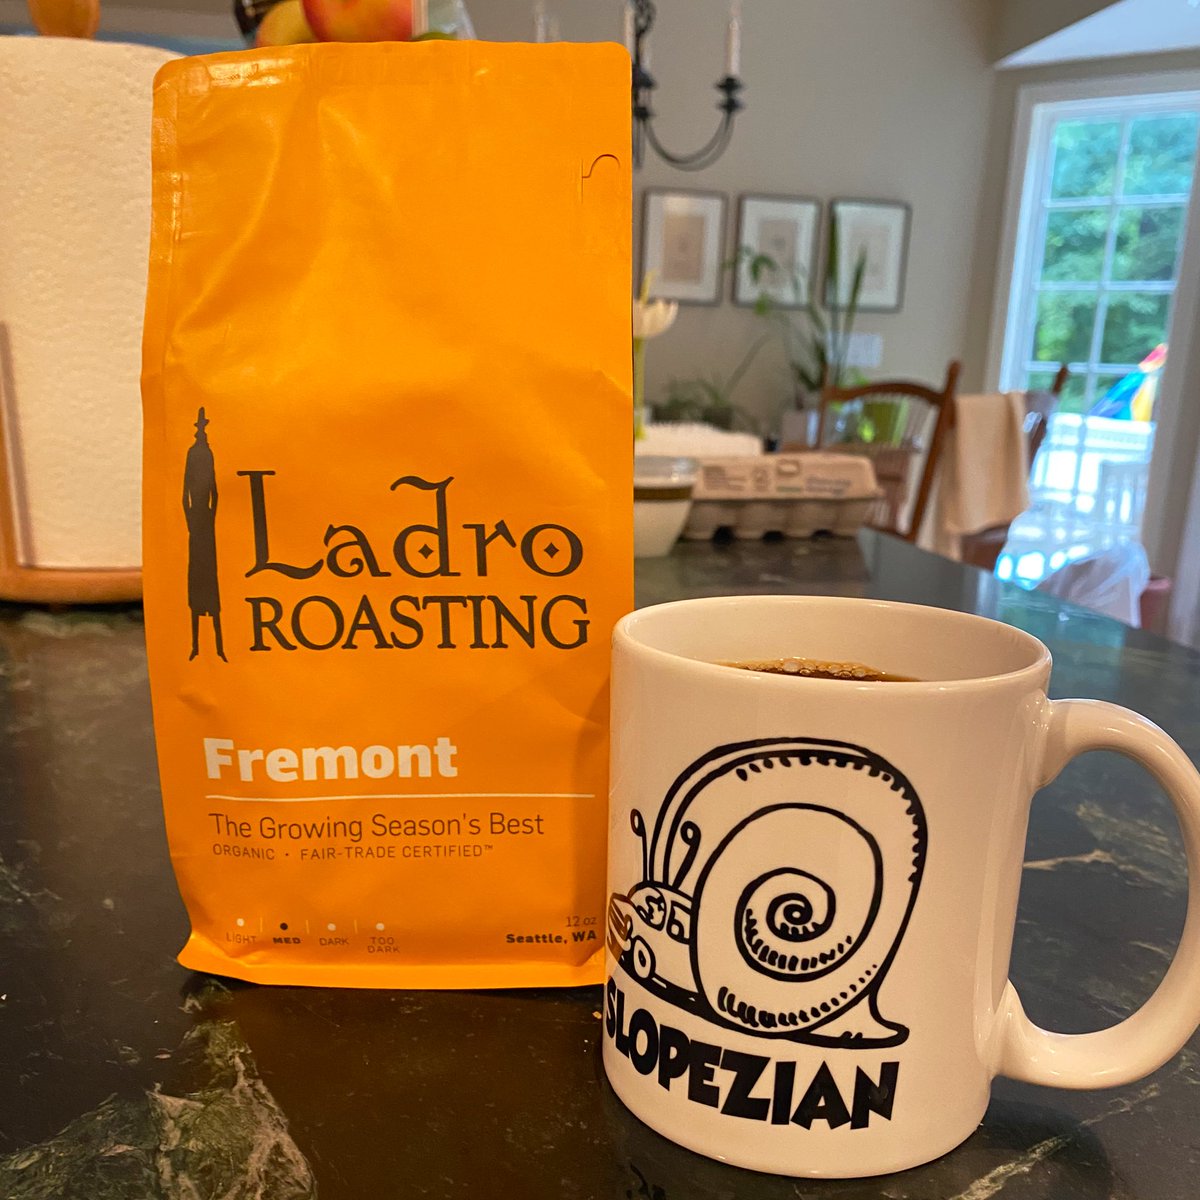 Ladro Roasting FremontI absolutely love this blend! After trying it last year, I just had to get a bag of beans as a treat during this quarantine. There’s some real nice, sweet molasses here alongside fruit and nutty notes. Truly exceptional.